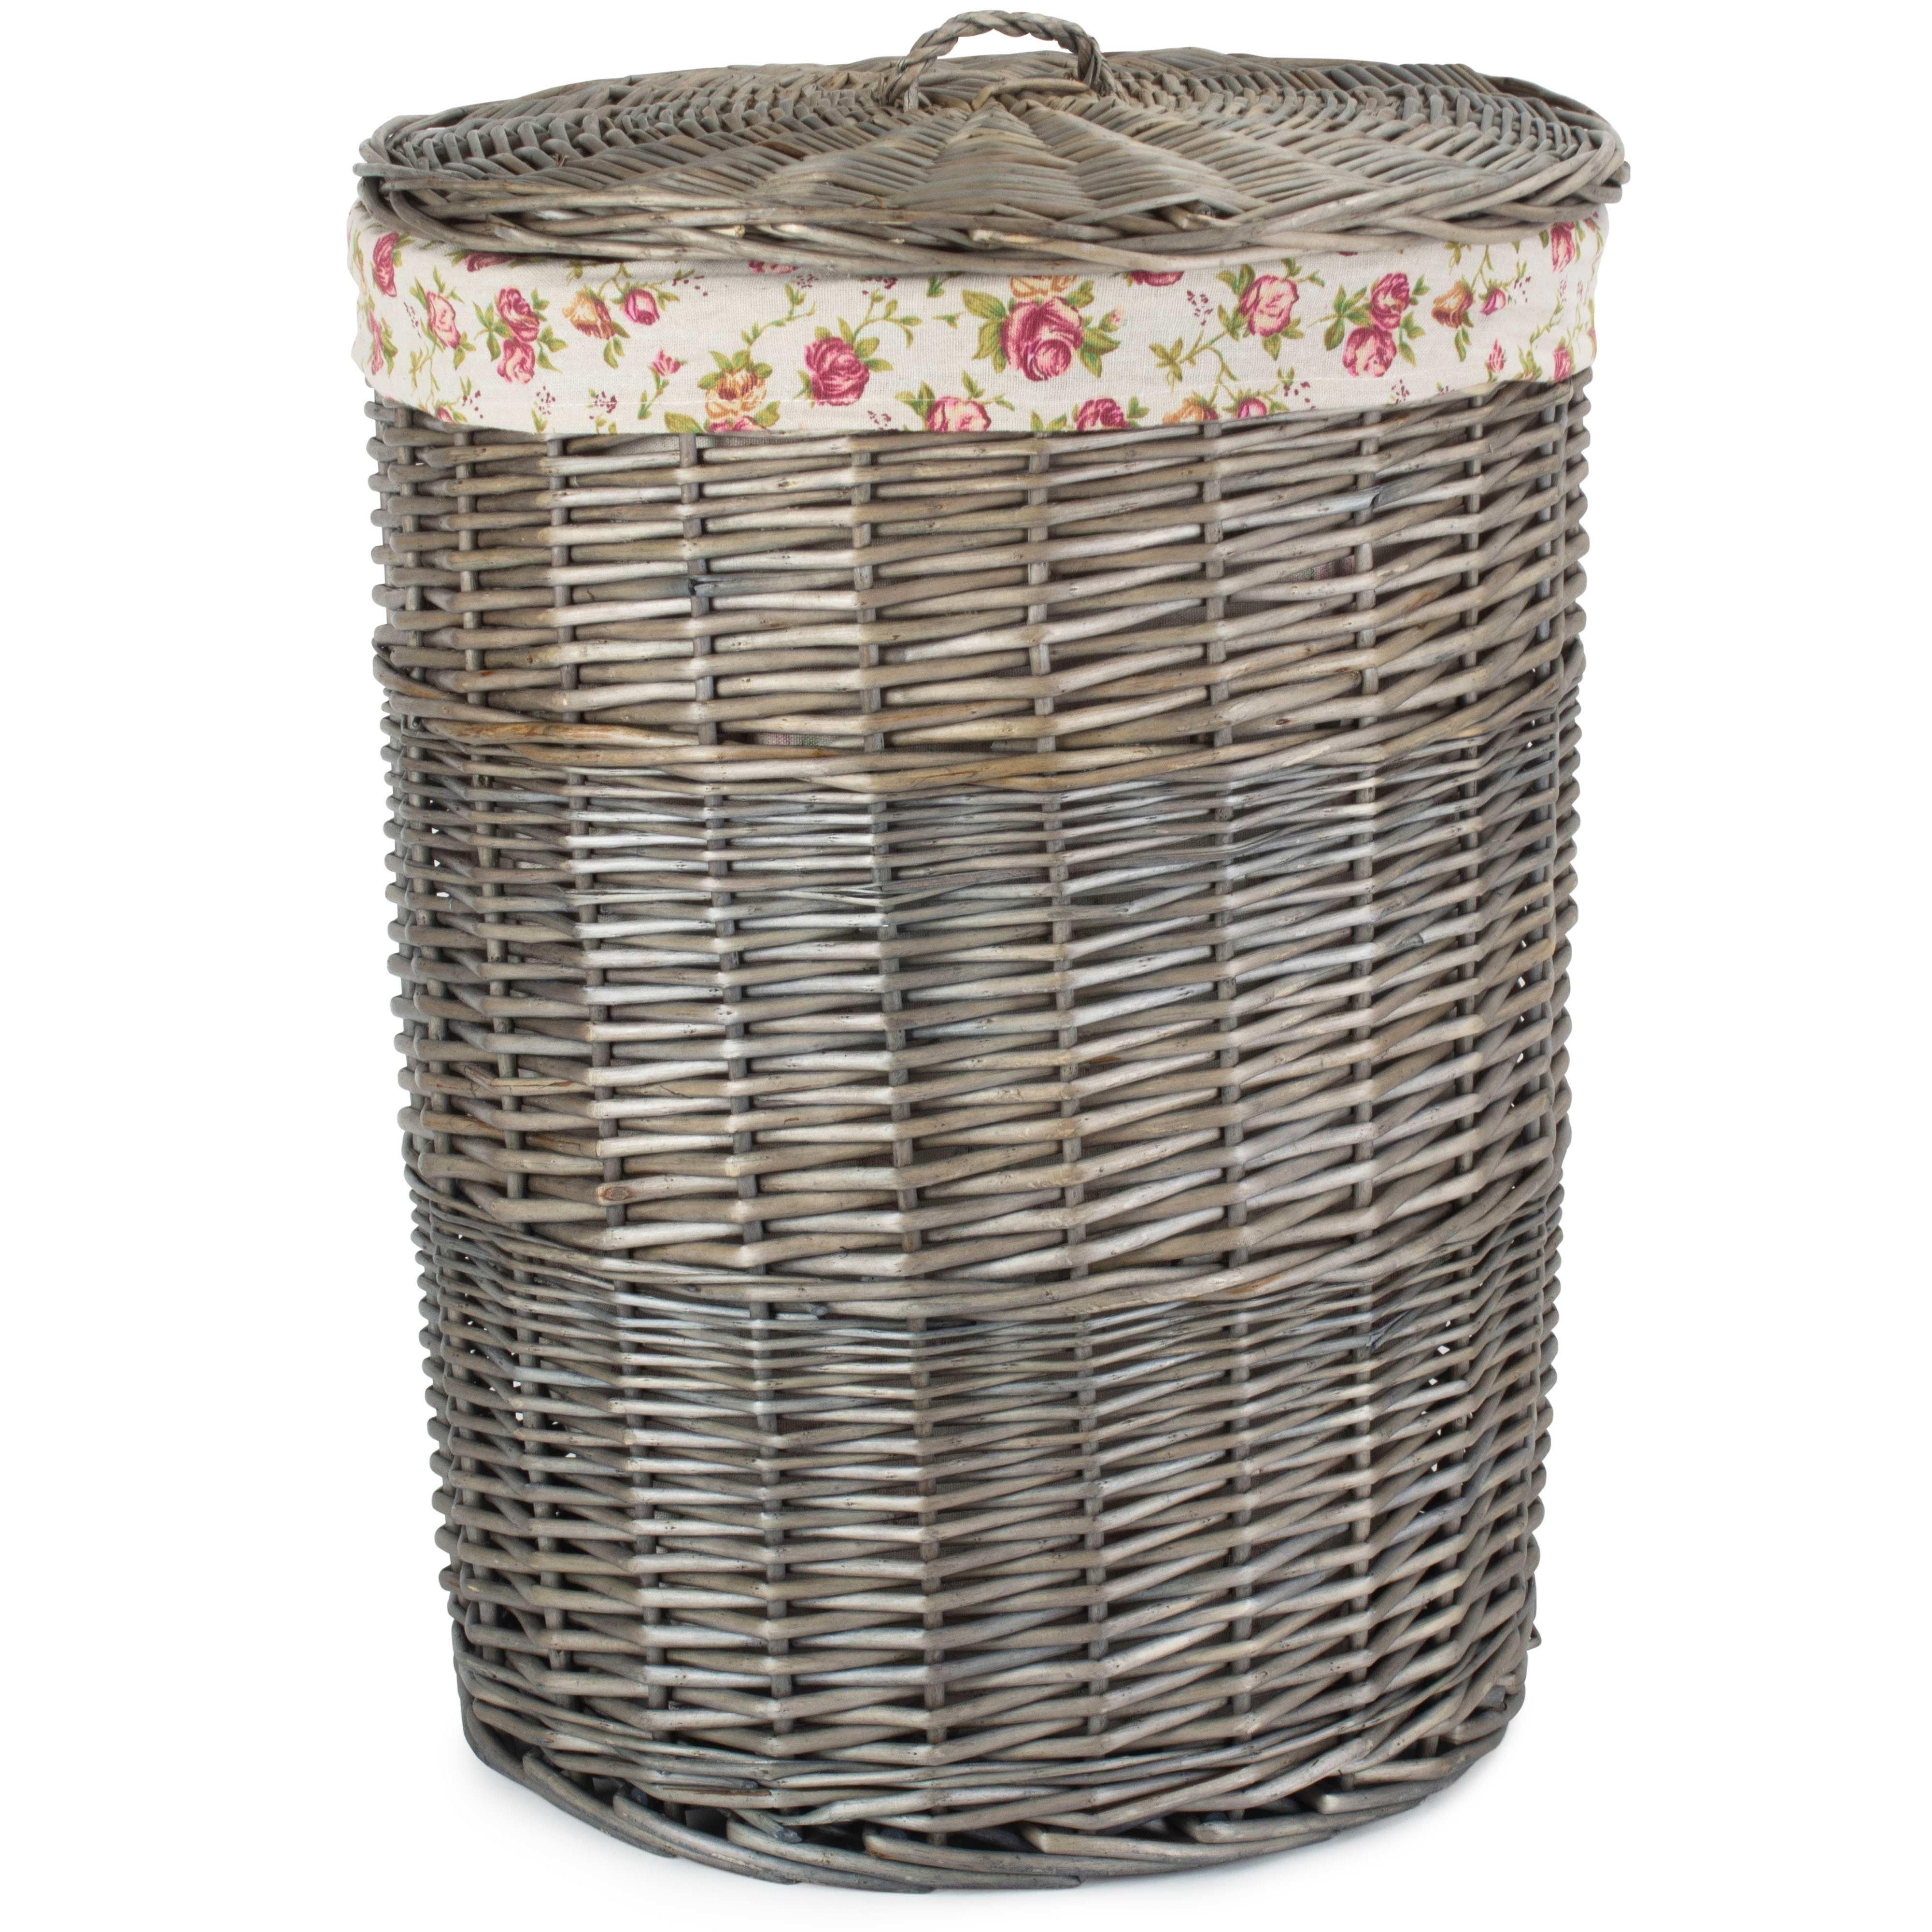 Cotton Lined Wicker Antique Wash Round Laundry Baskets